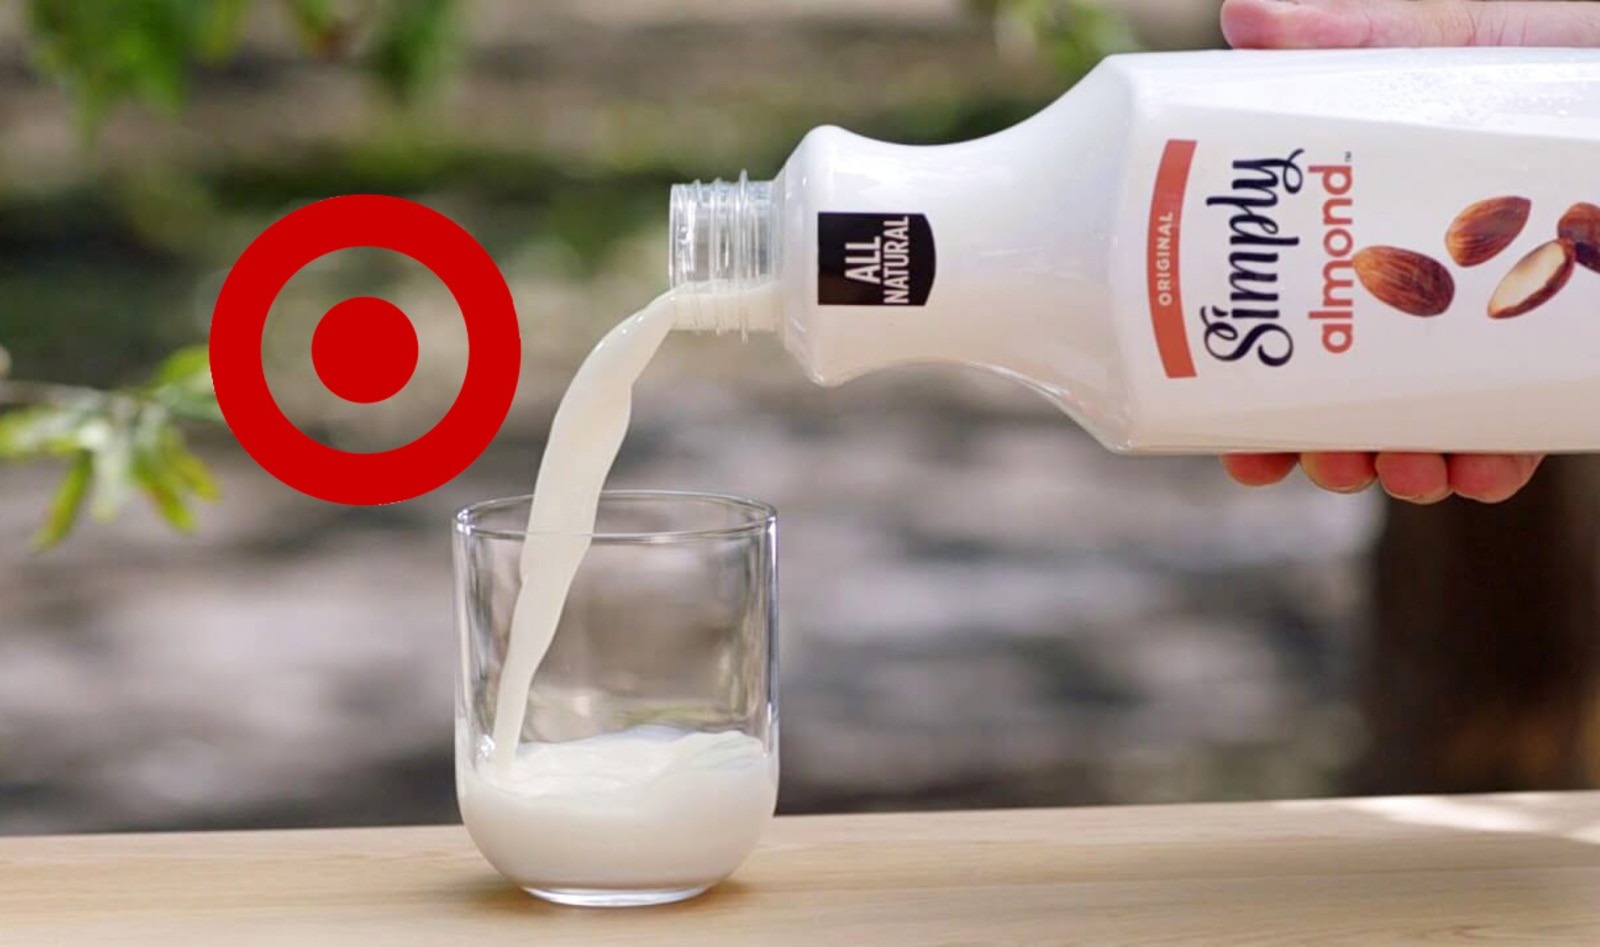 Coca-Cola Brand “Simply” Launches Almond Milk at Target&nbsp;